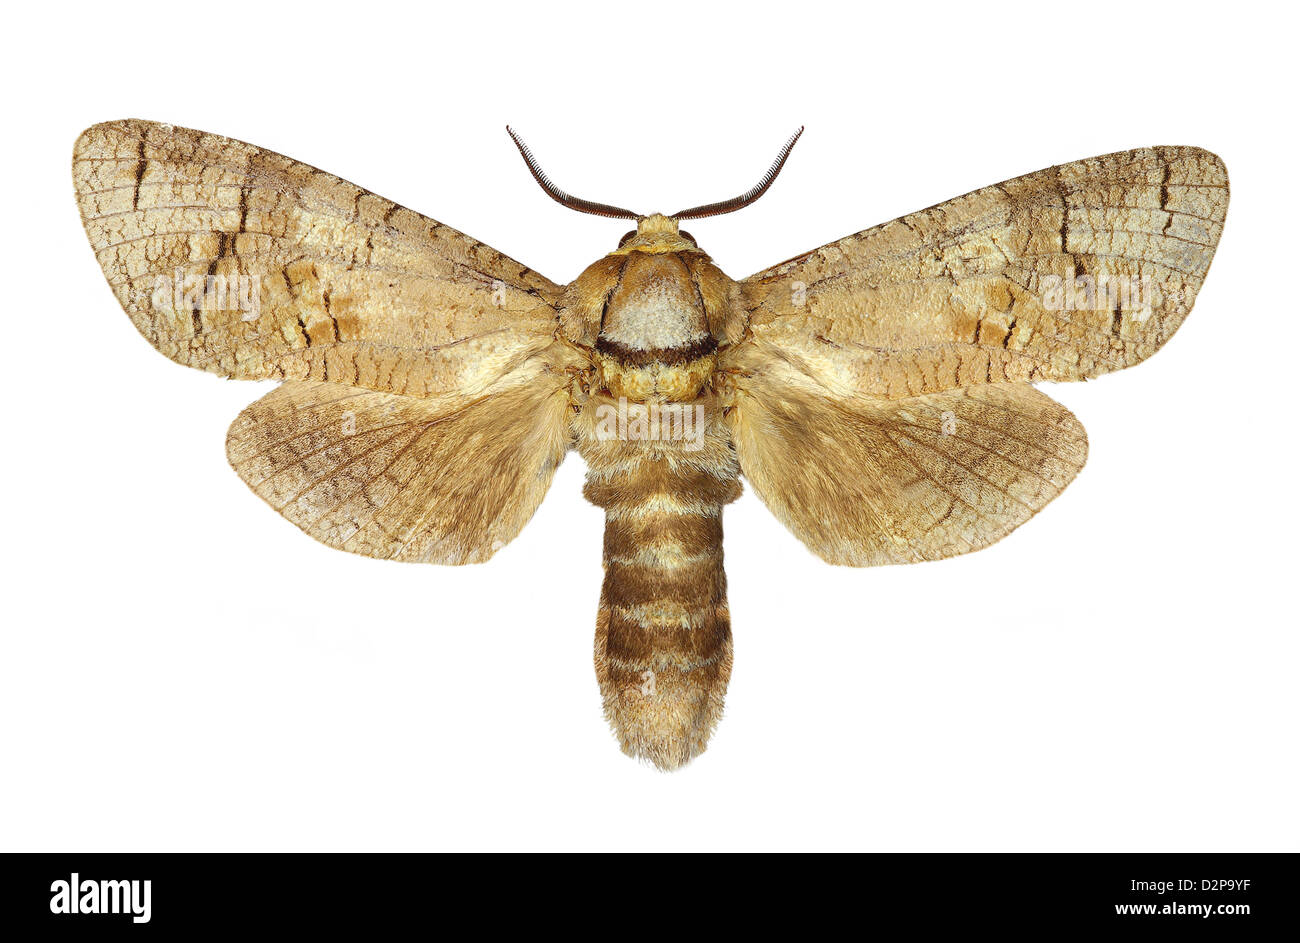 Goat moth (Cossus cossus) isolated on white background Stock Photo